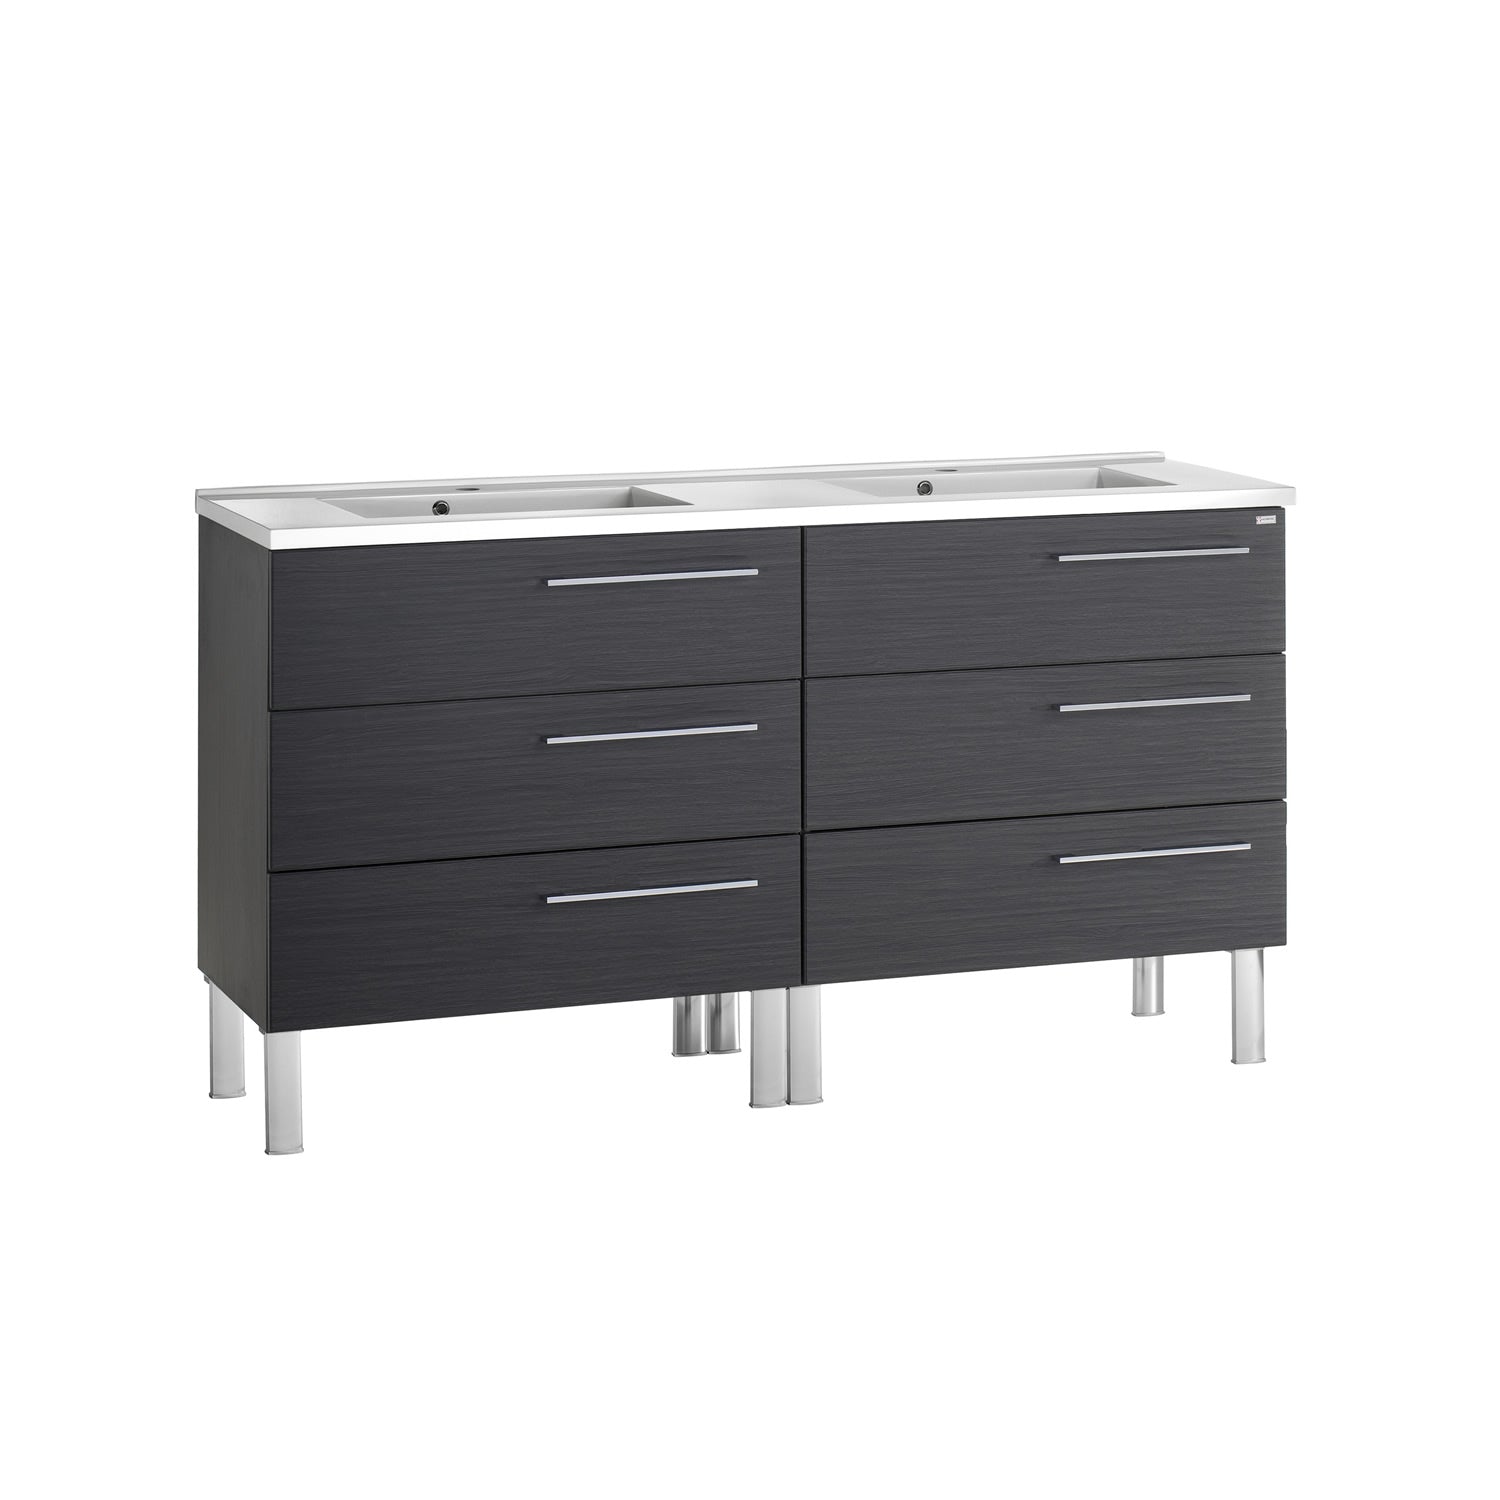 48" Double Vanity, Floor Mount, 6 Drawers with Soft Close, Serie Dune by VALENZUELA